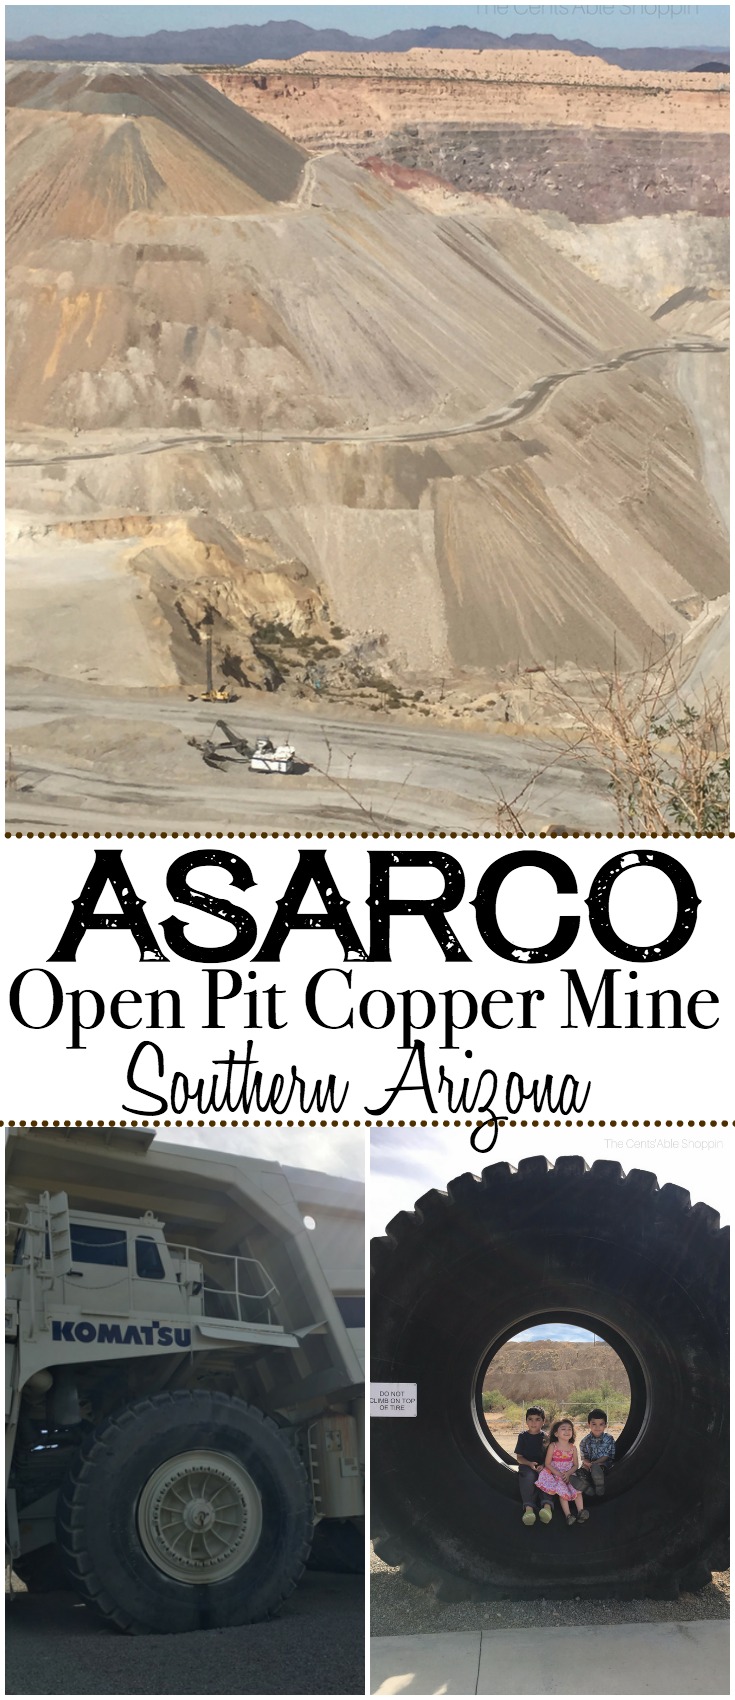 The ASARCO Mineral Discovery Mine just south of Tucson is the largest open-pit copper mine in Arizona that is available for public tours (without reservation). It's an incredible learning opportunity for people of all ages! #Arizona #RoadTrip #ASARCO #CopperMine #Tucson